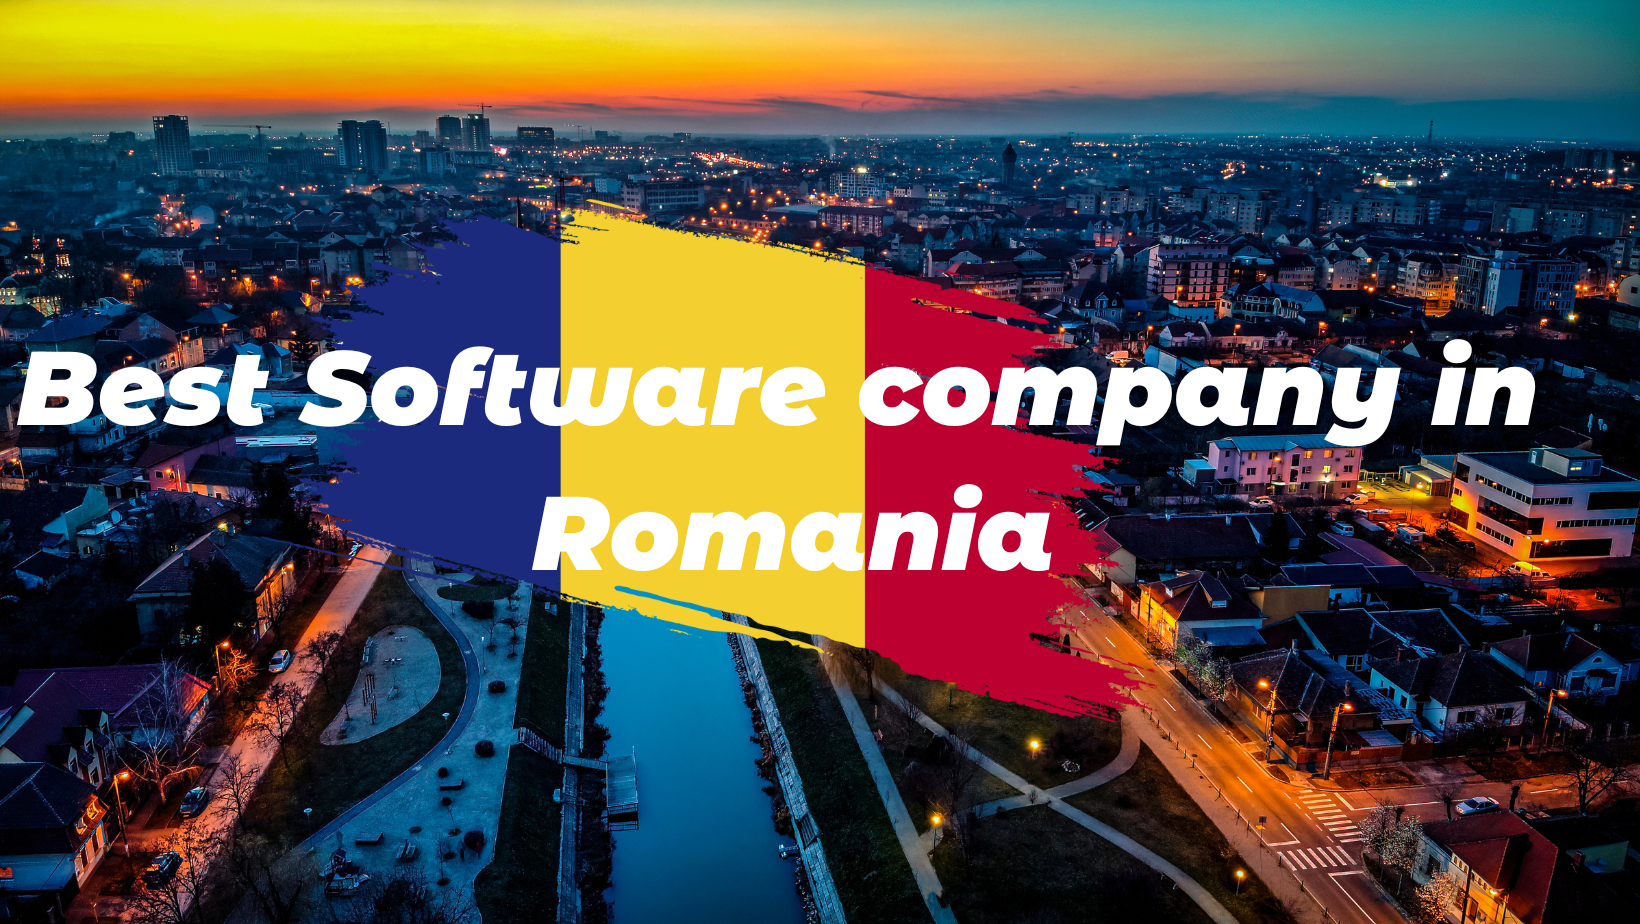 Best Software company in Romania